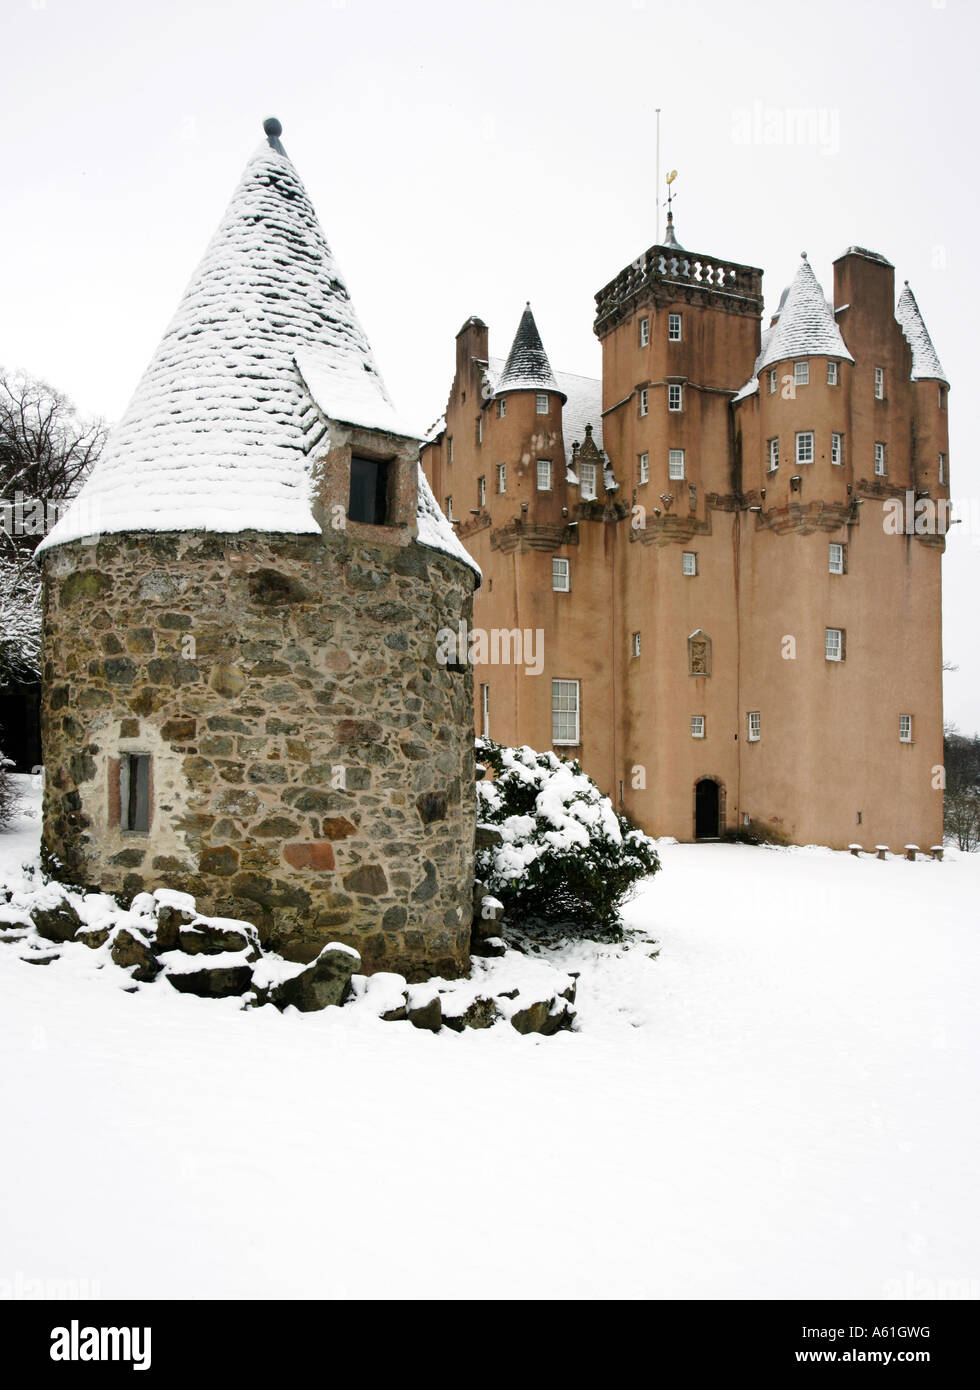 A winter scenic image of Craigievar Castle near Aberdeen in the North East of Scotland Stock Photo